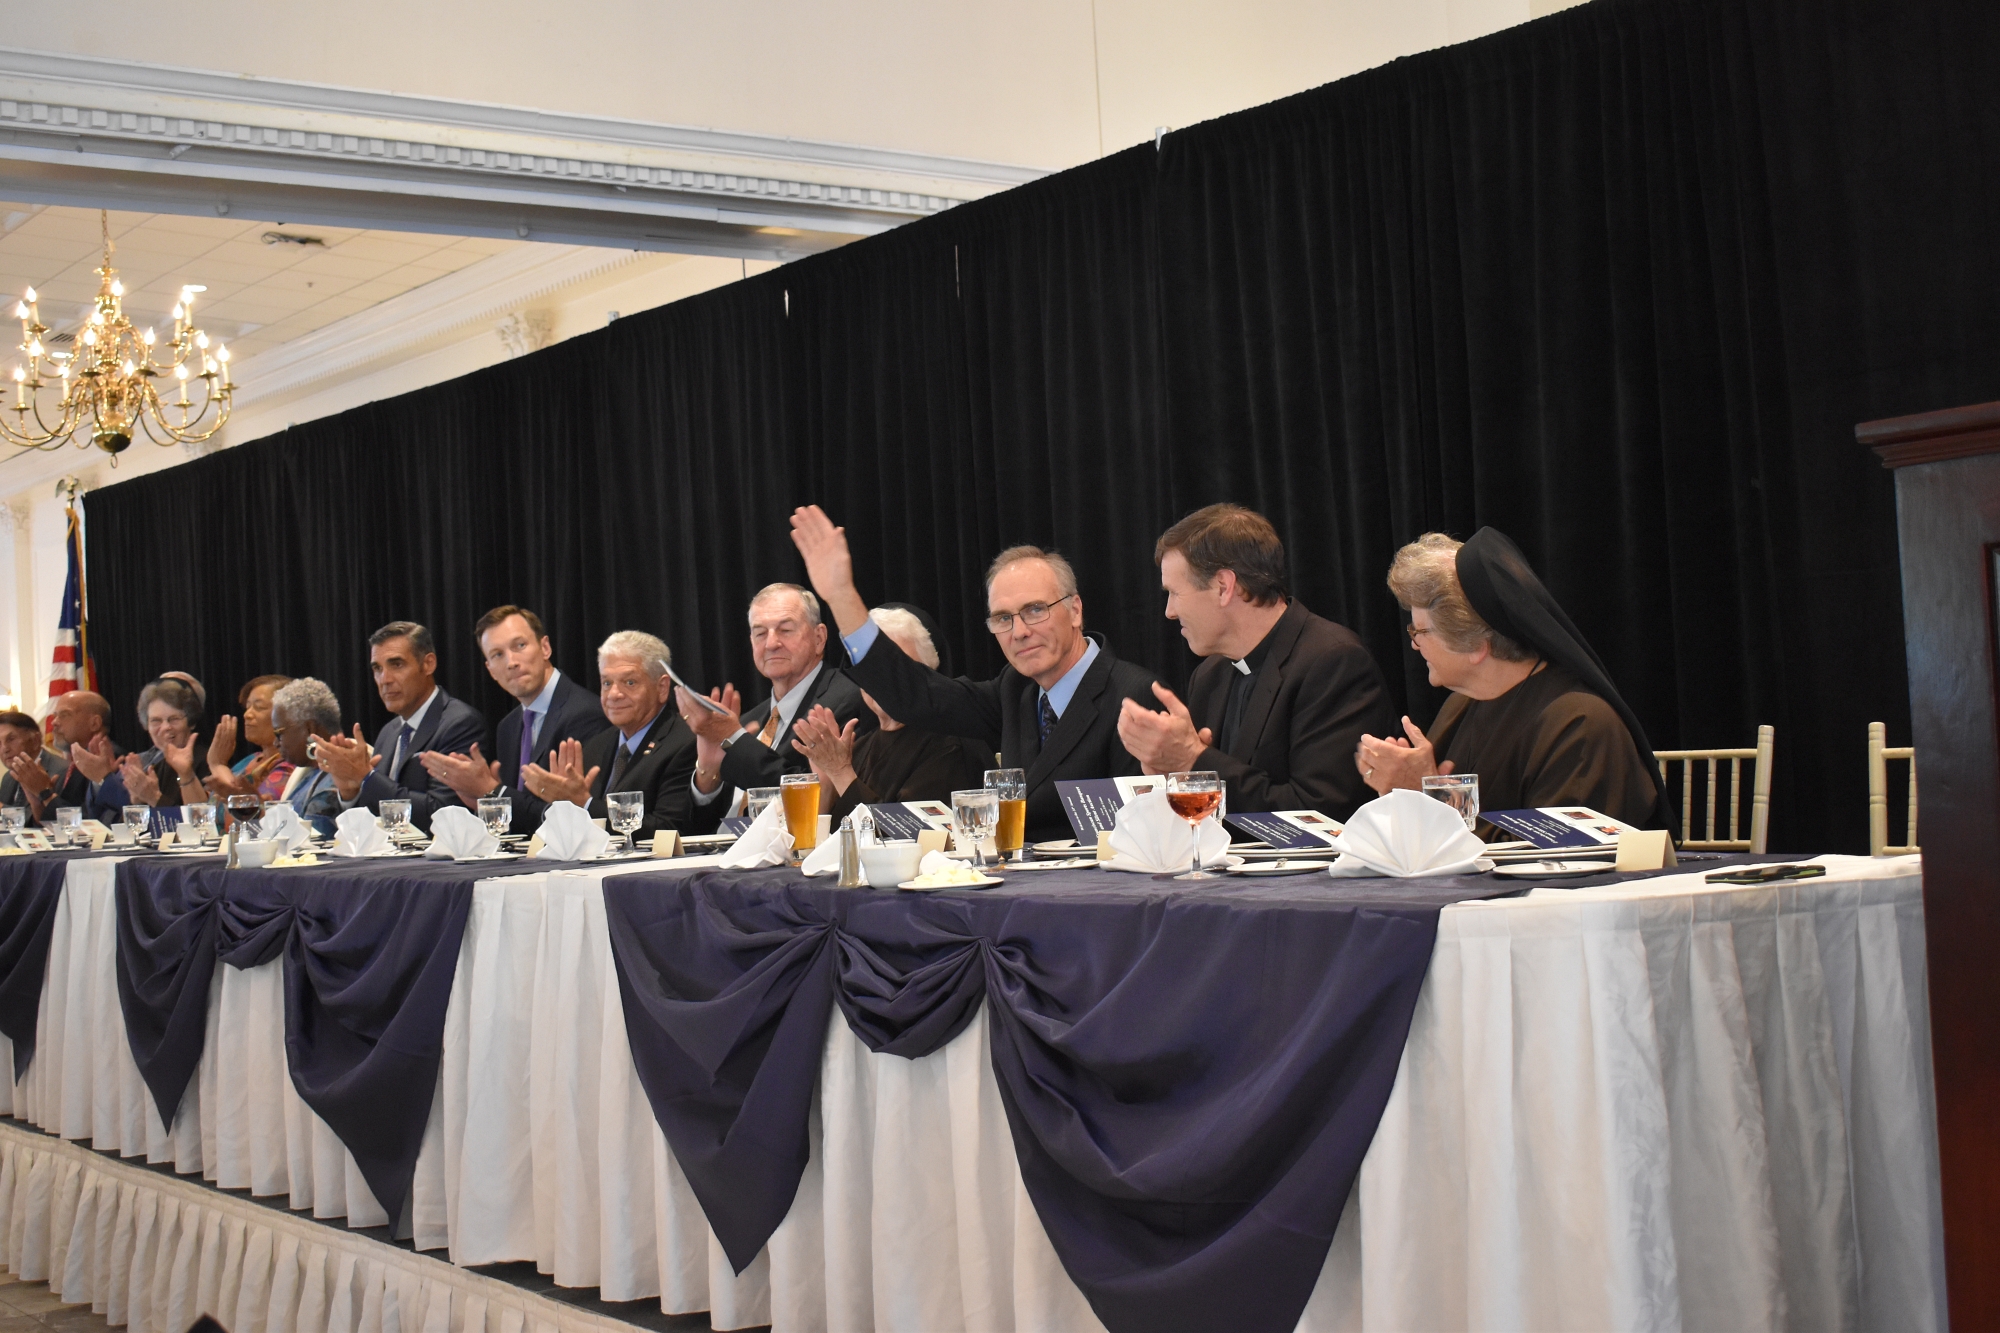 Franciscan Sports Banquet a joyful event for 700 supporters The